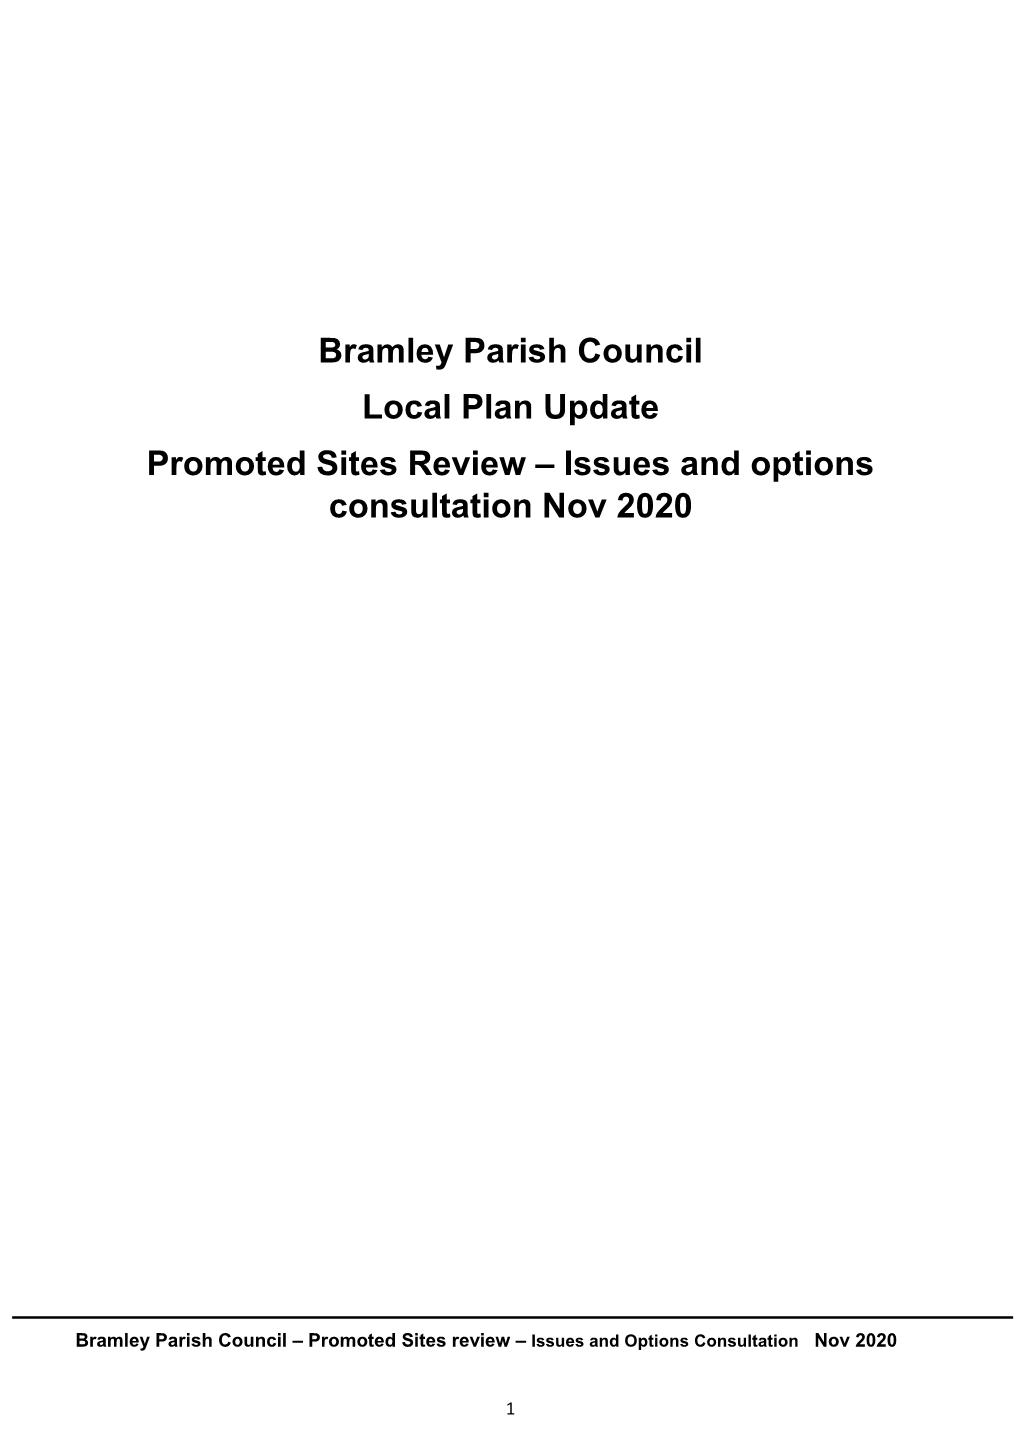 Bramley Parish Council Local Plan Update Promoted Sites Review – Issues and Options Consultation Nov 2020